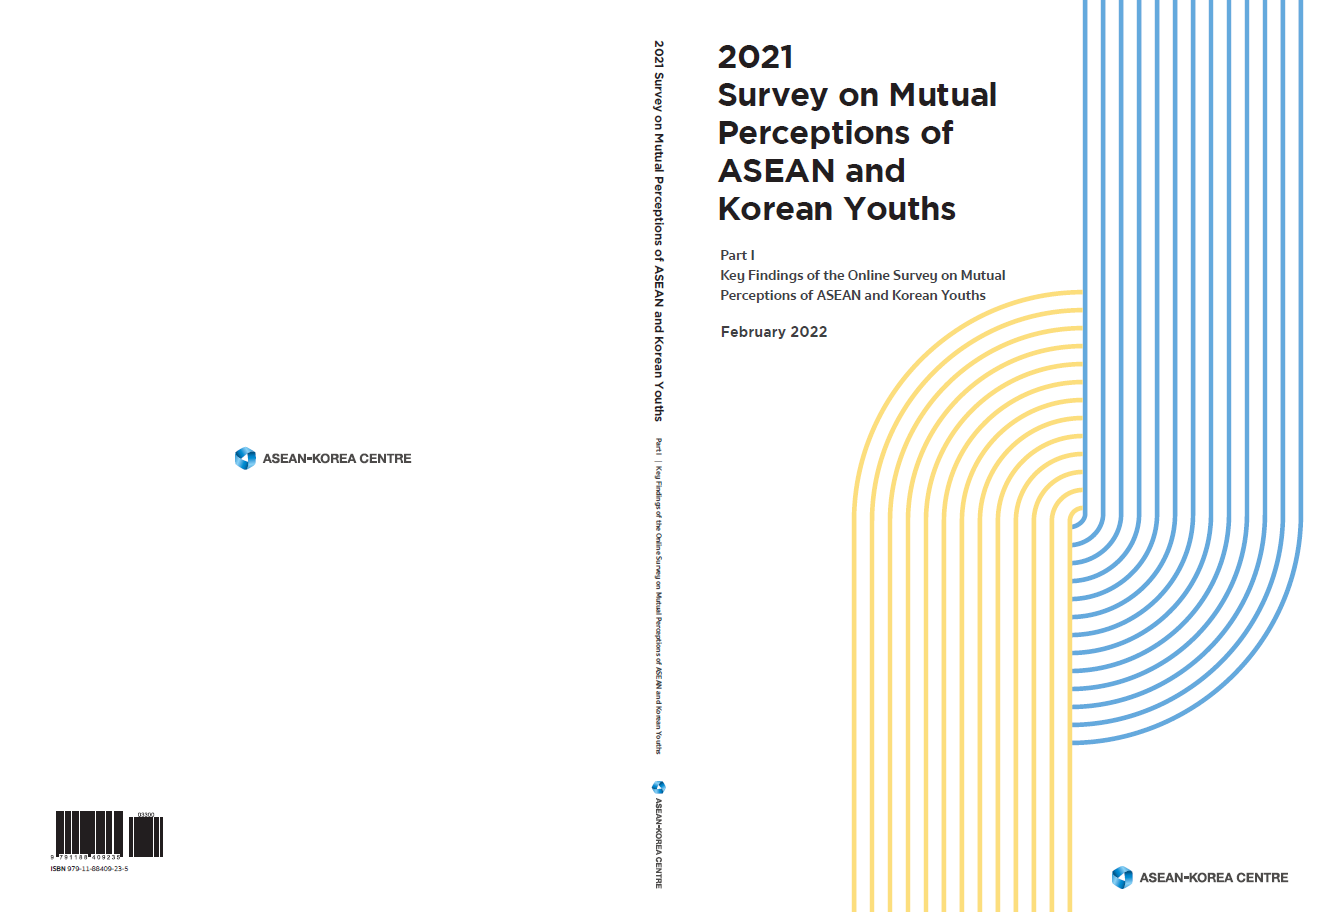 2021 Survey on Mutual Perceptions of ASEAN and Korean Youths